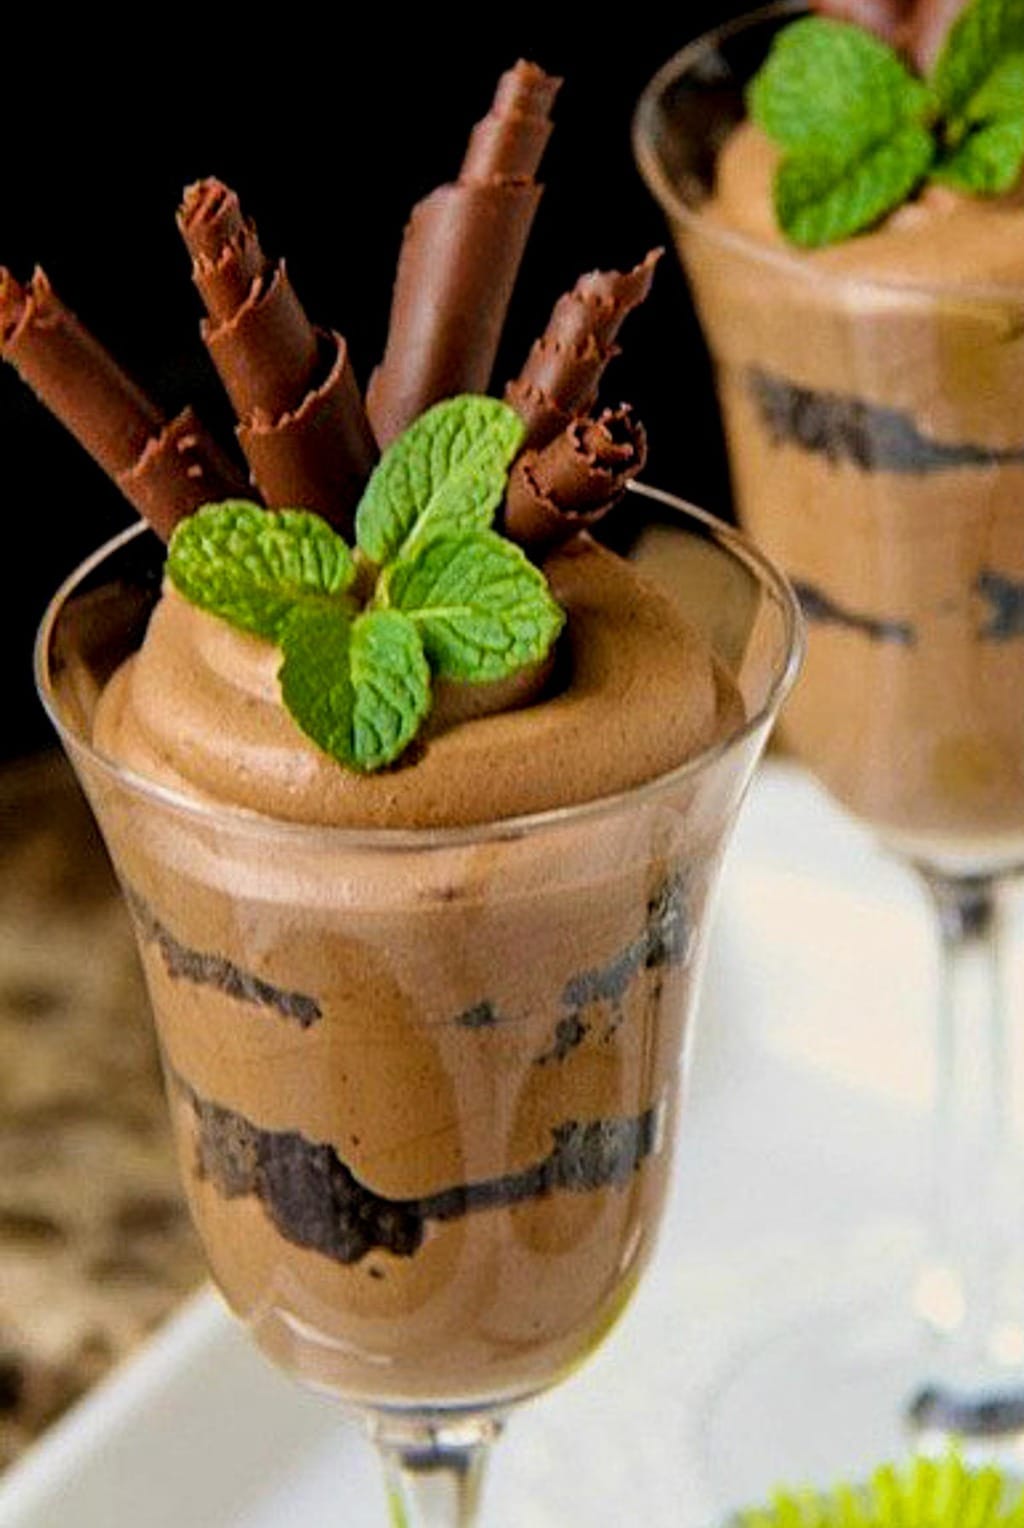 Closeup photo of Chocolate French Silk desserts in glasses garnished with chocolate curls and fresh mint leaves.